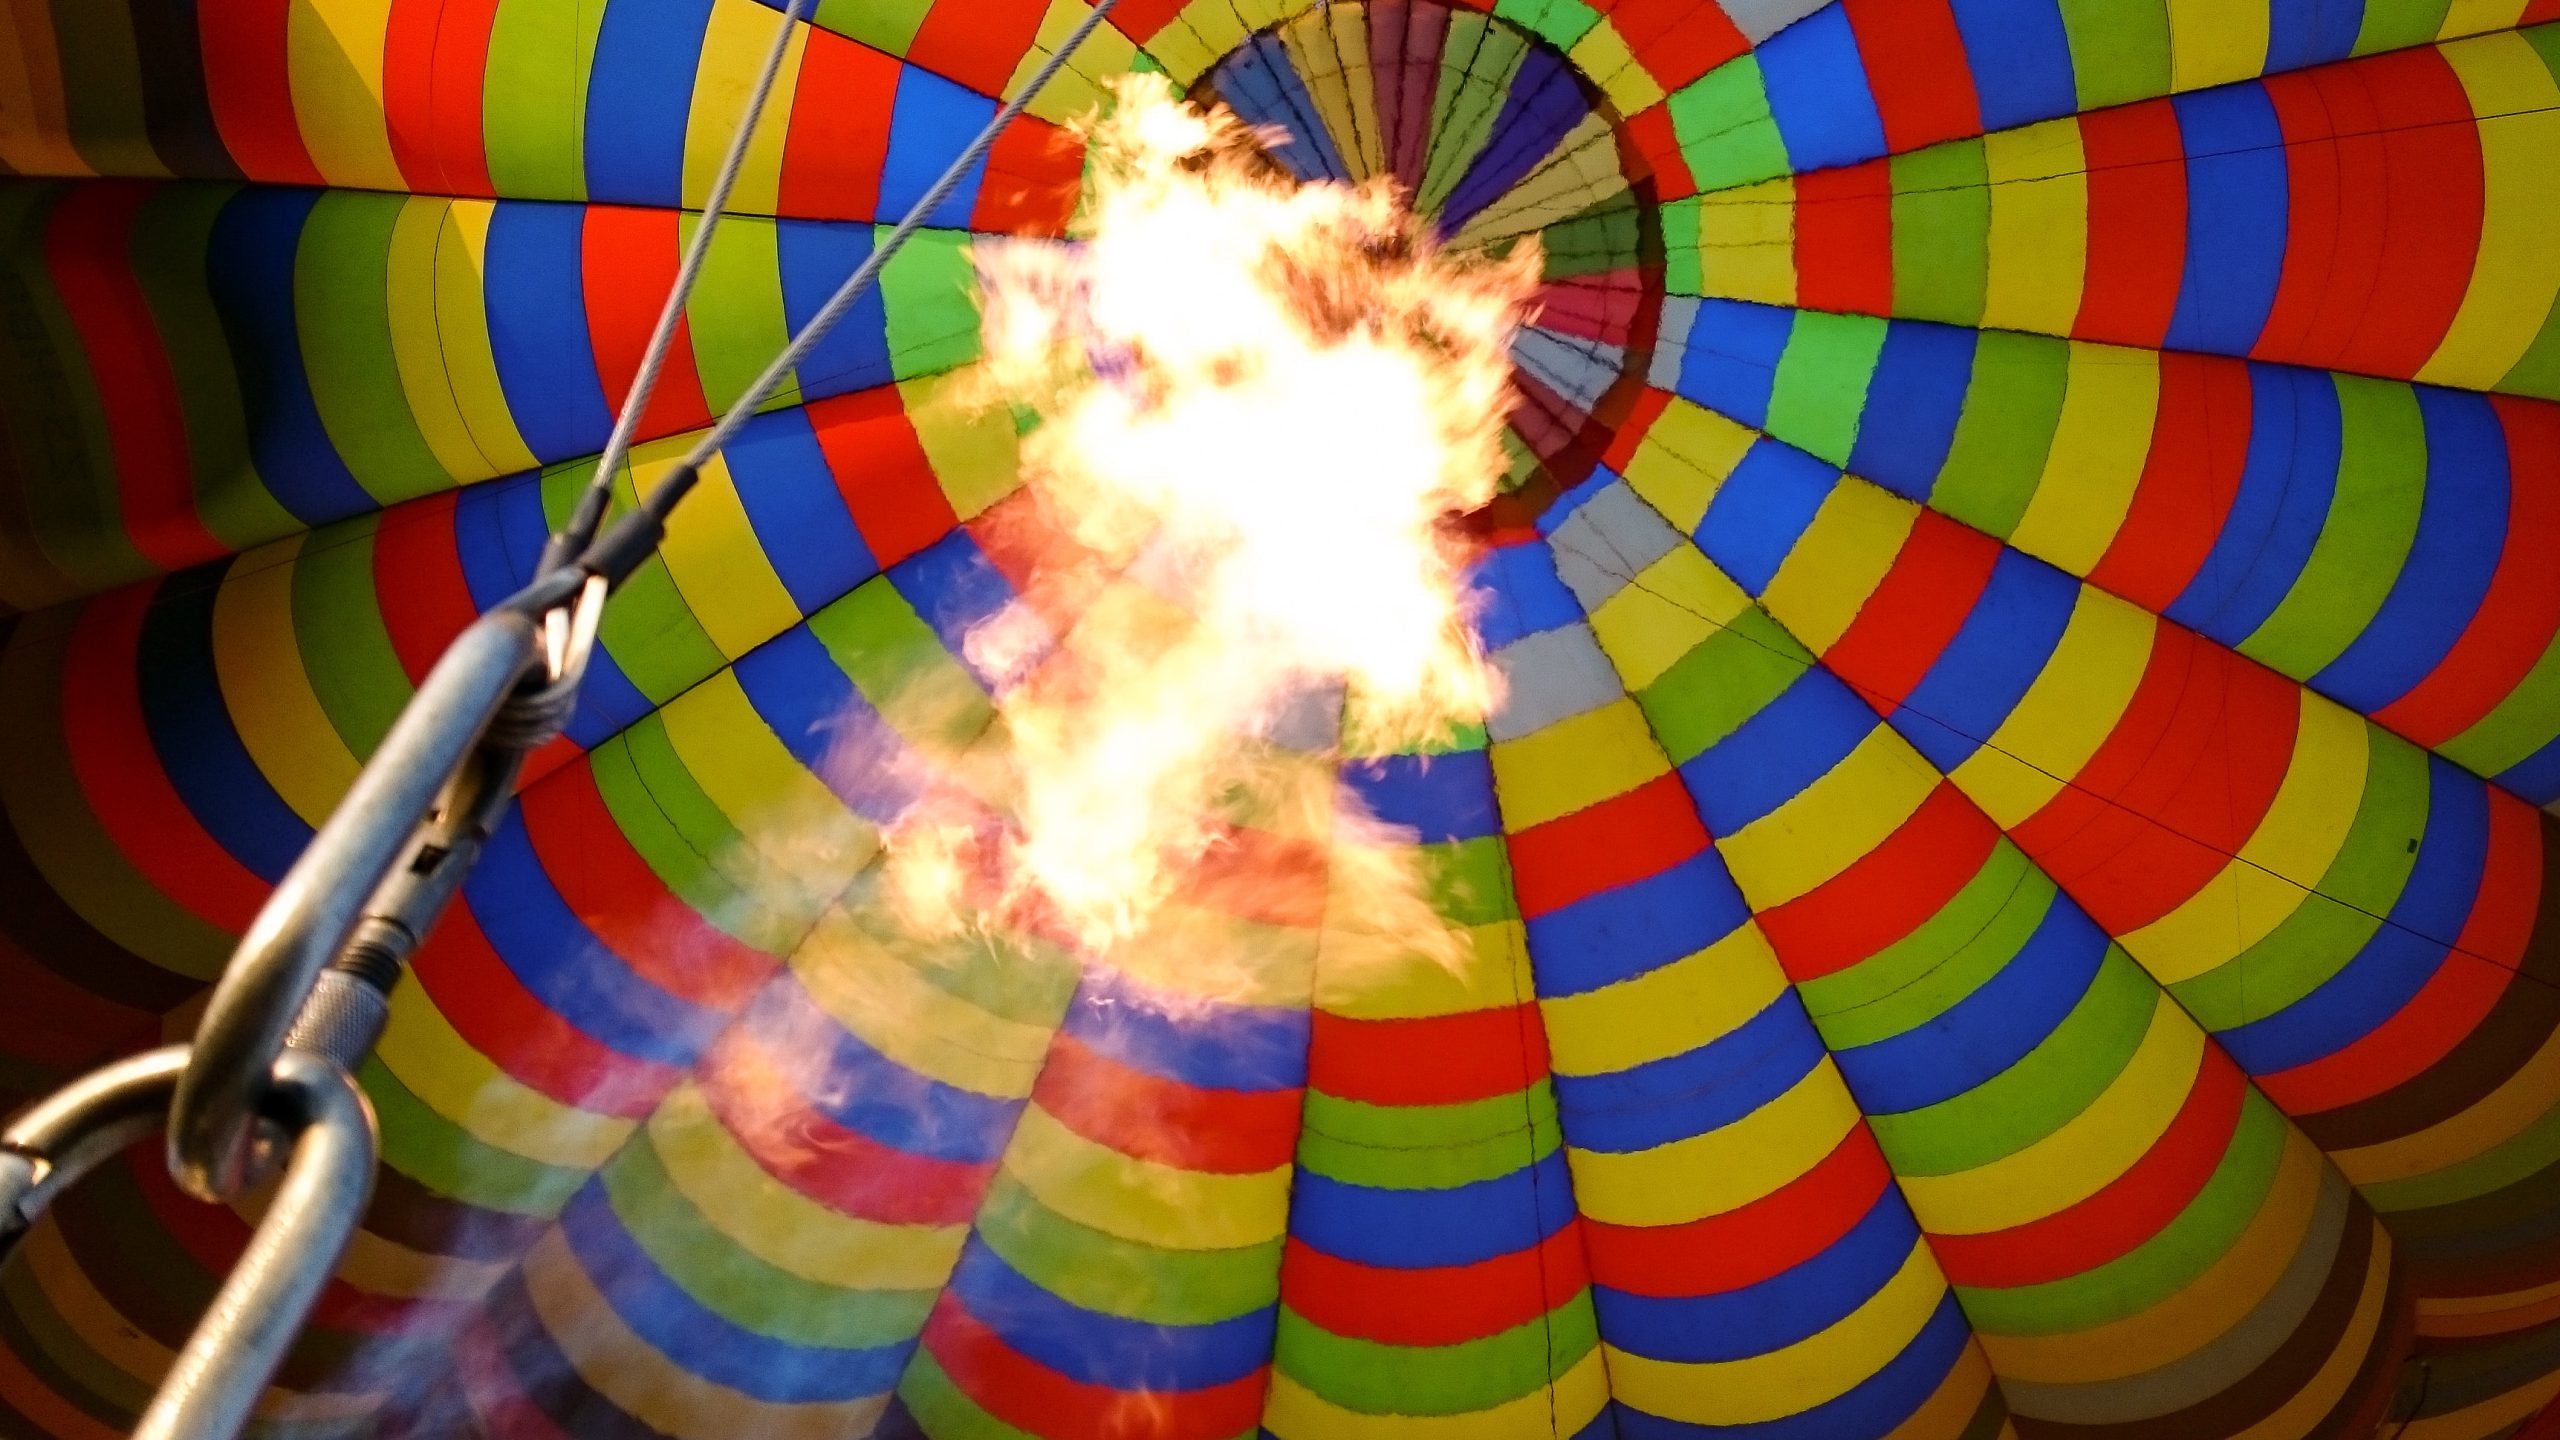 A view of the hot air balloon from the inside